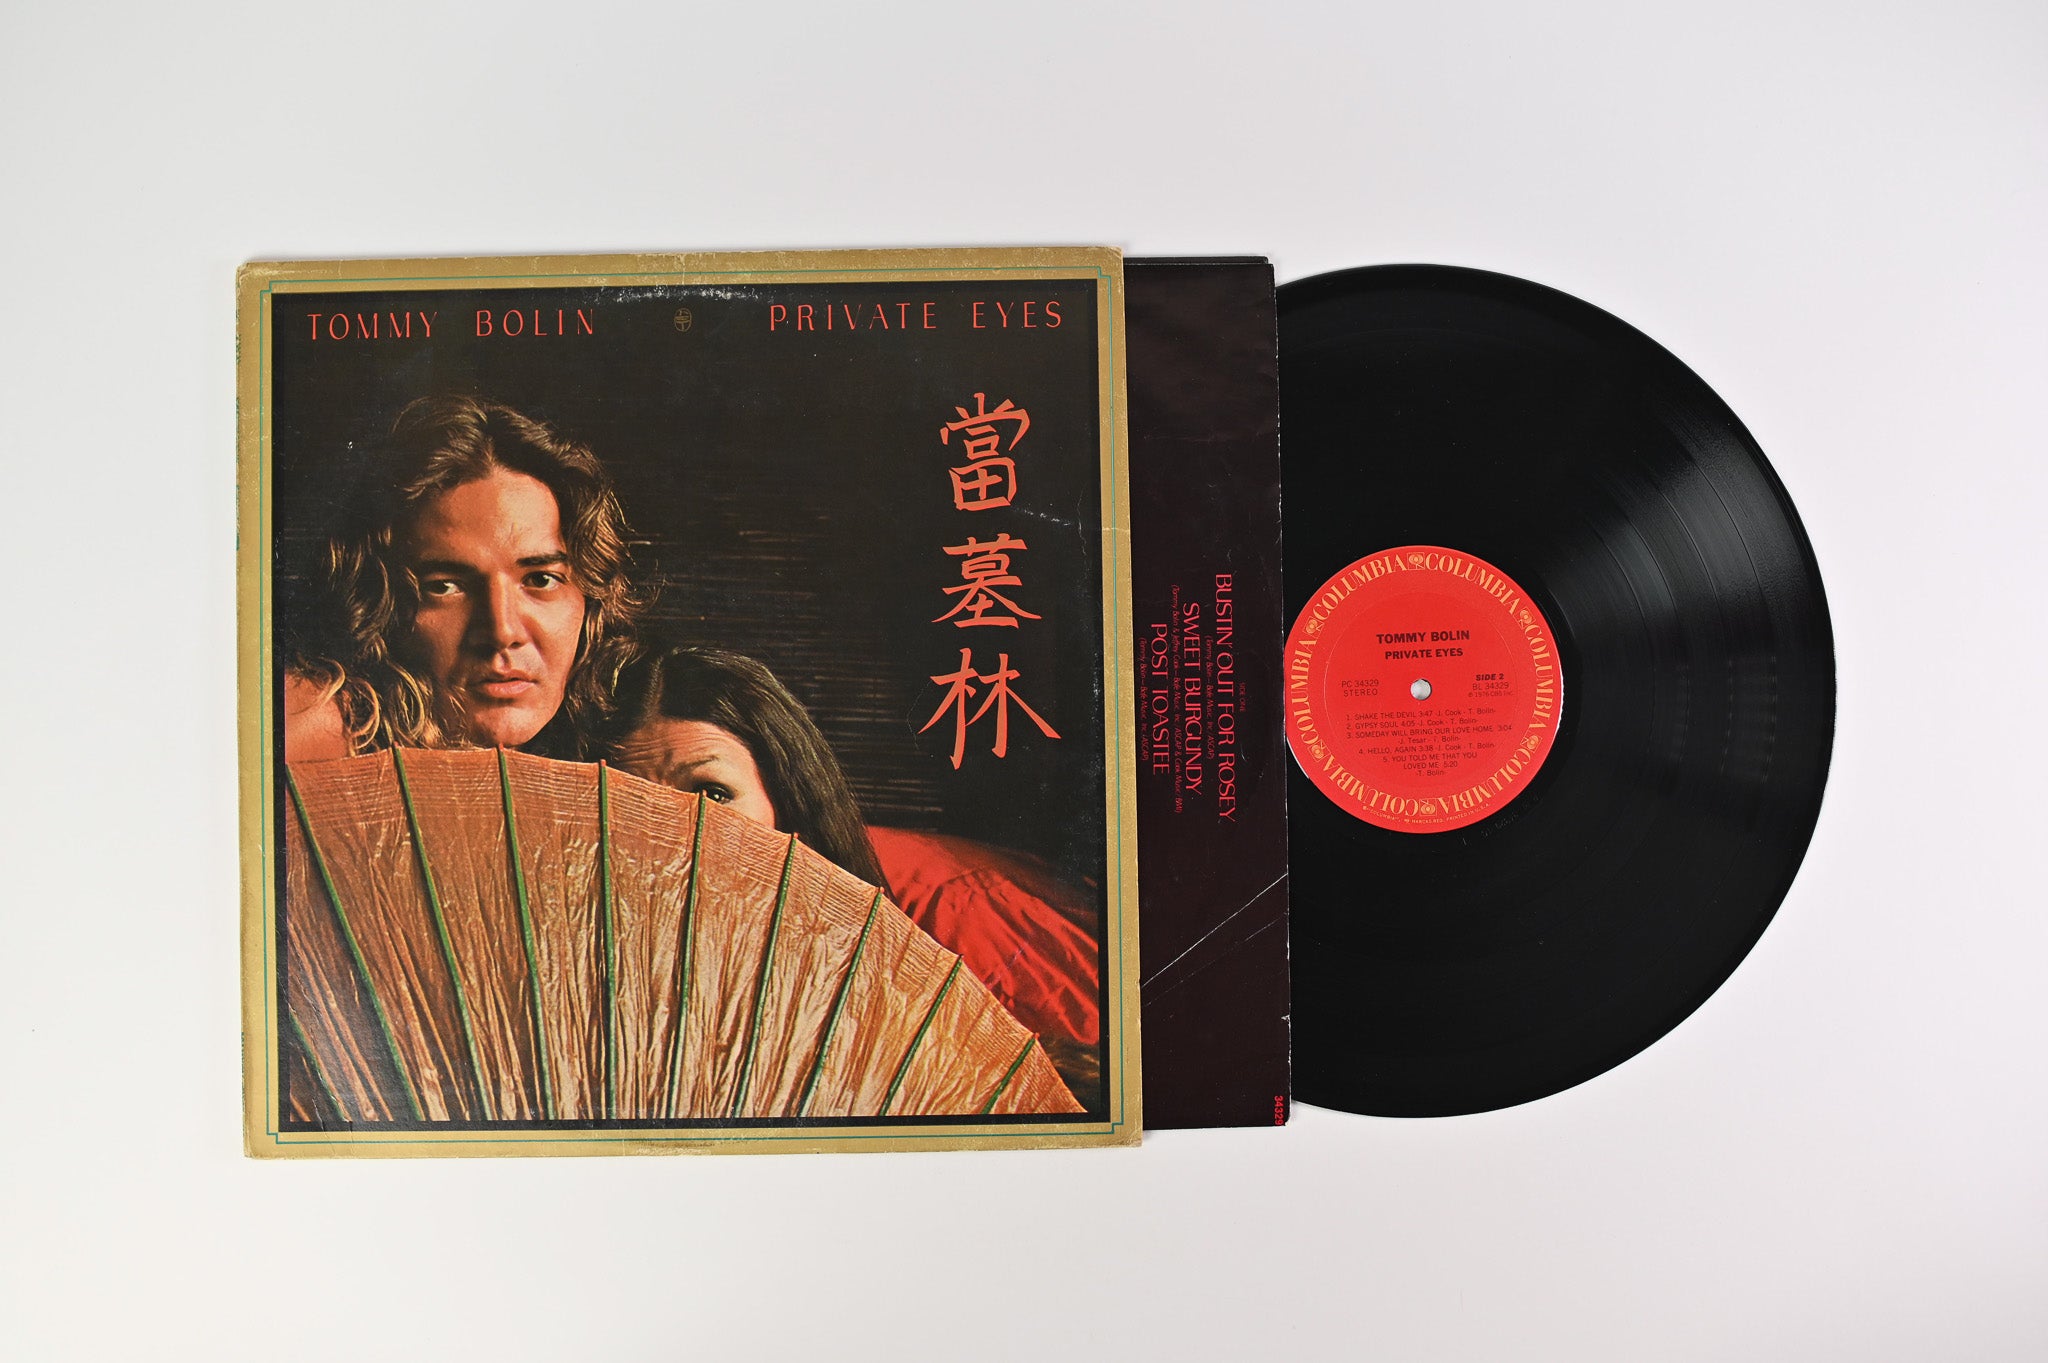 Tommy Bolin - Private Eyes on Columbia